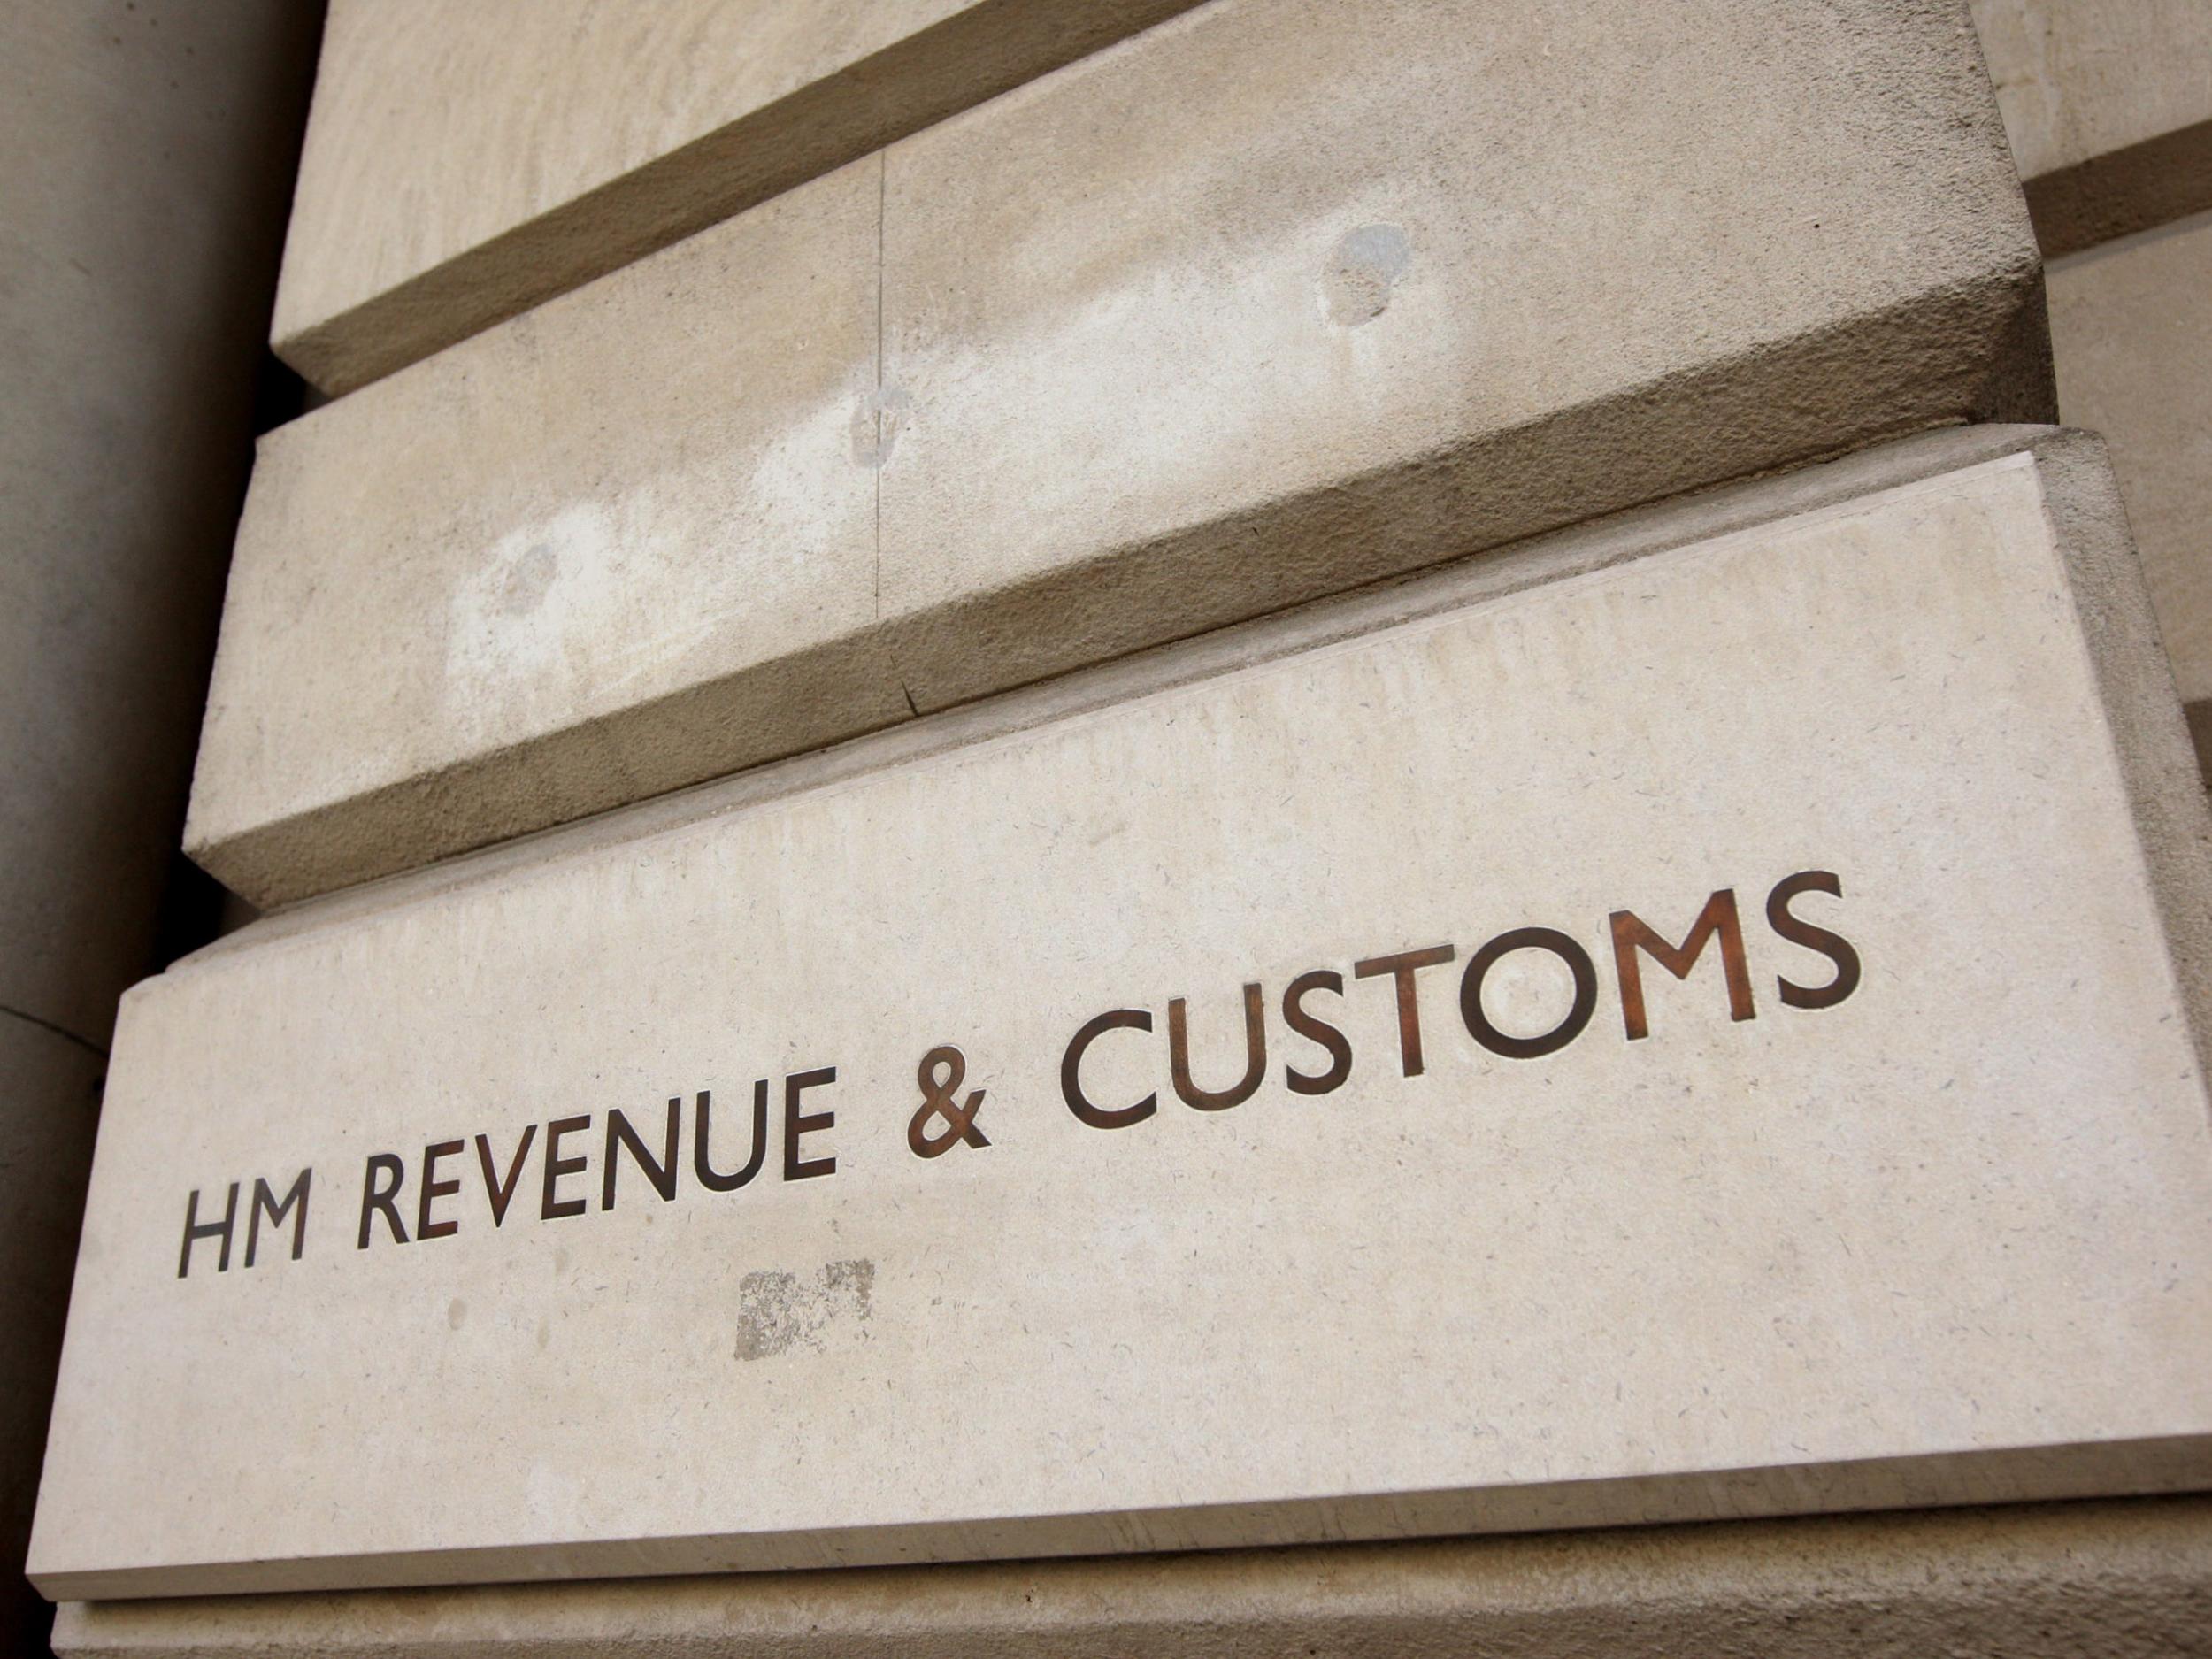 The HMRC are clamping down on agent fees and image rights amongst other things